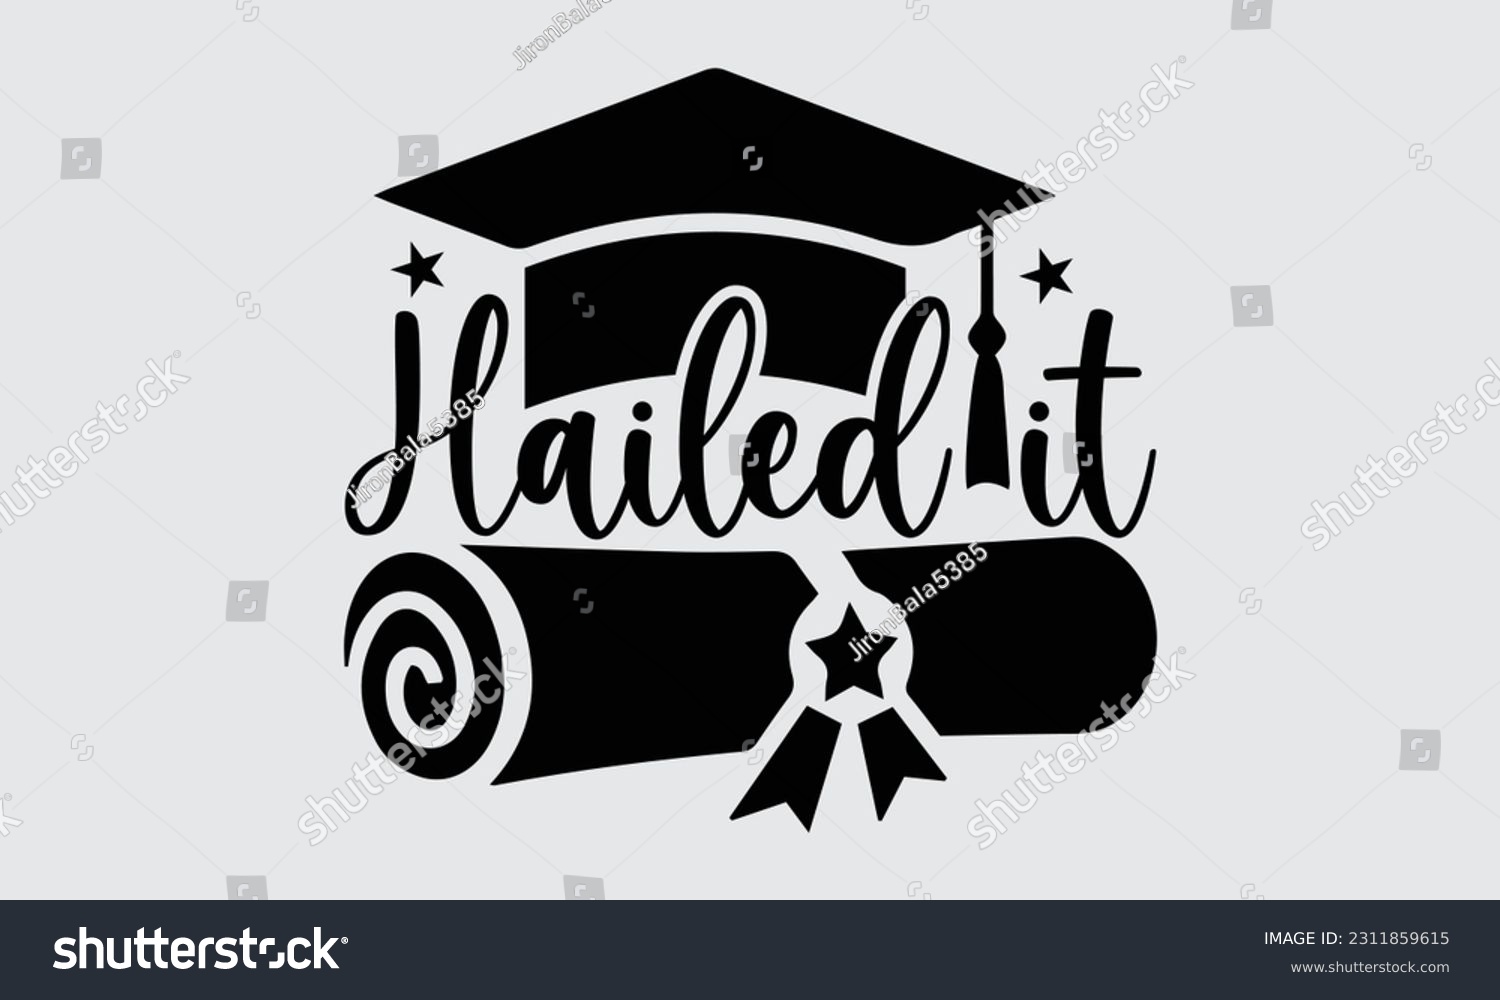 SVG of Hailed It - Graduate T-Shirt Design, Motivational Inspirational SVG Quotes, Hand Drawn Vintage Illustration With Hand-Lettering And Decoration Elements. svg